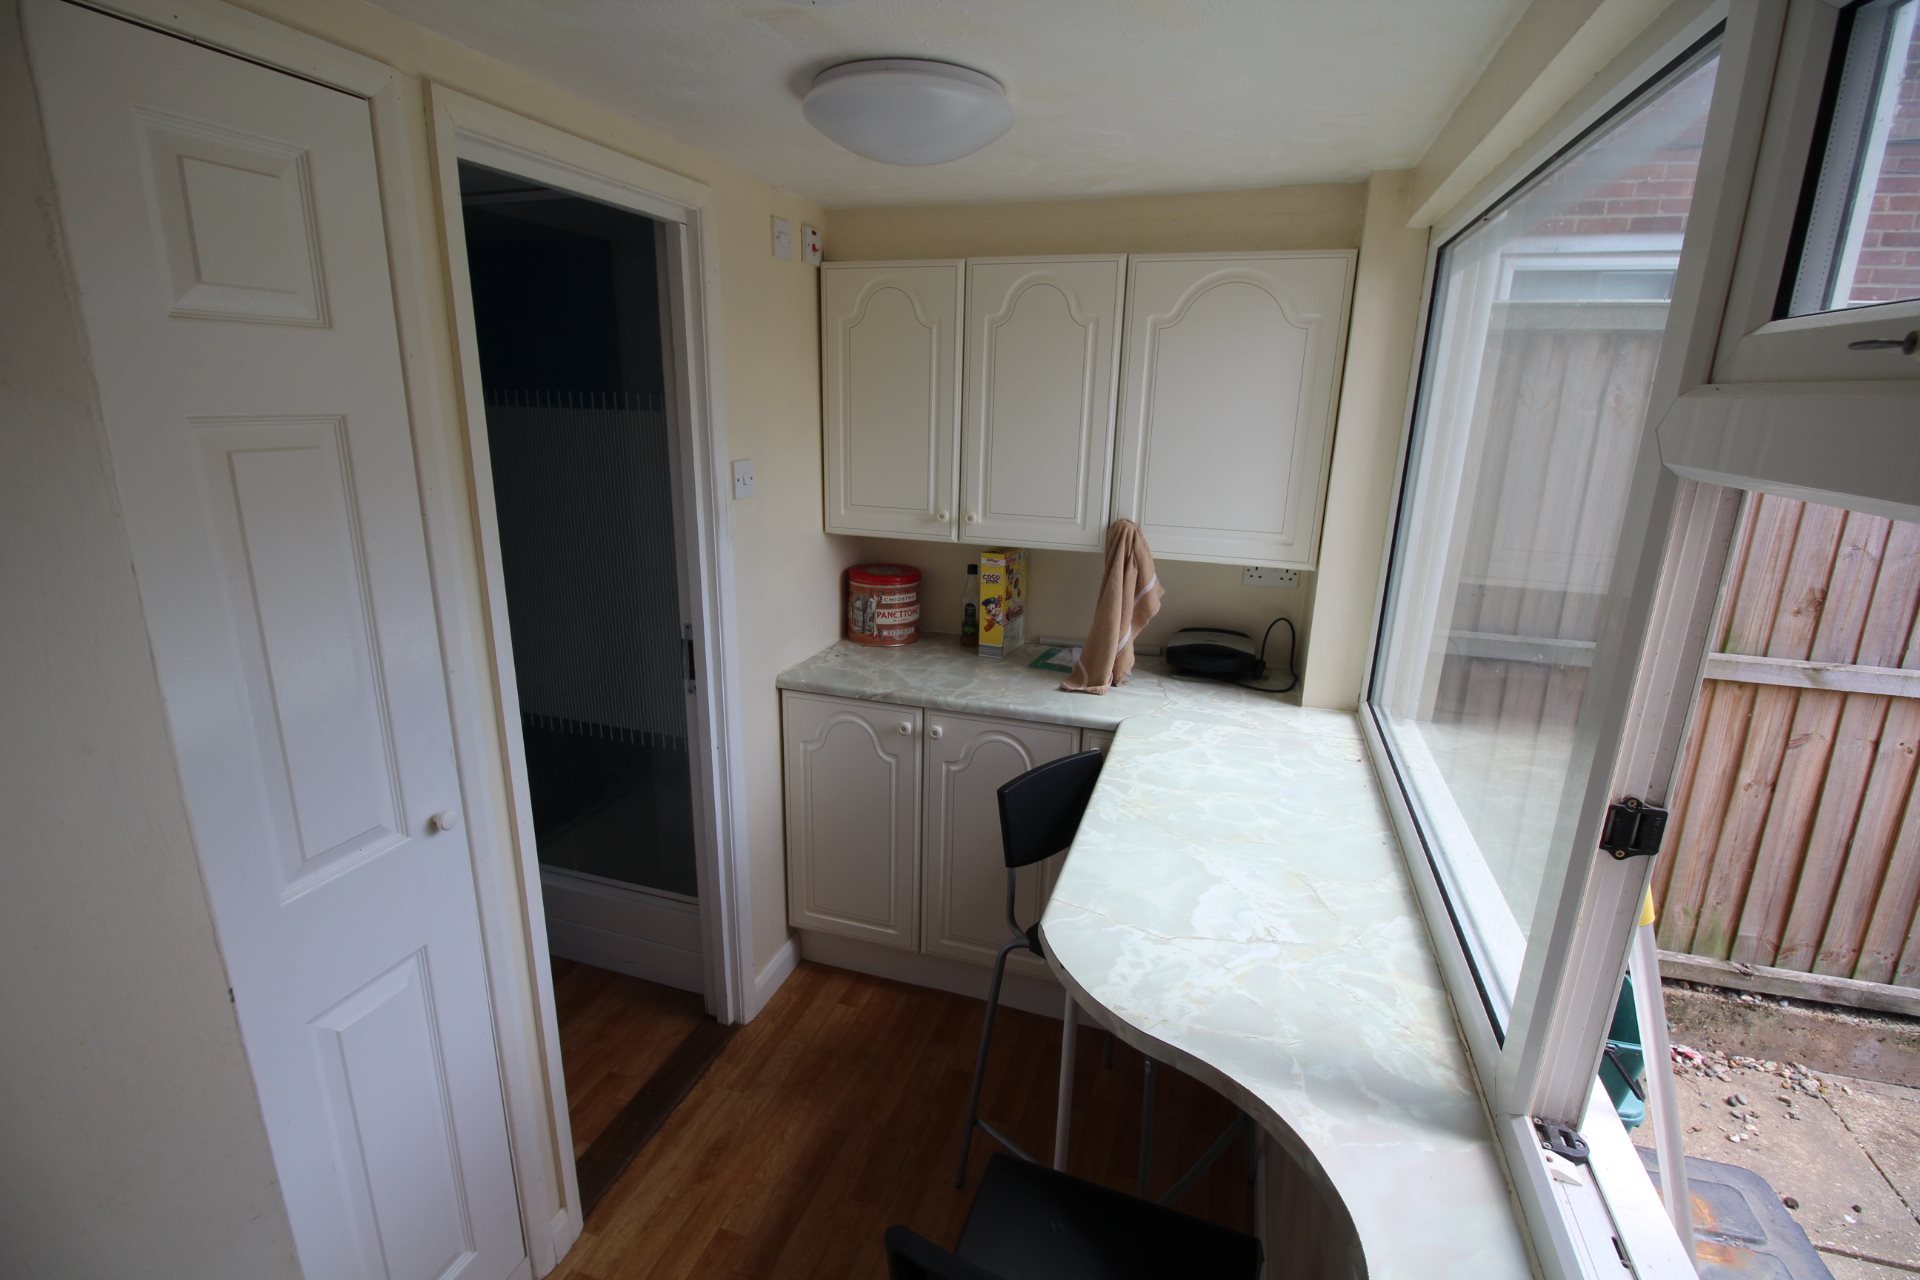 1 bed house / flat share to rent in Petworth Close, Wivenhoe 3